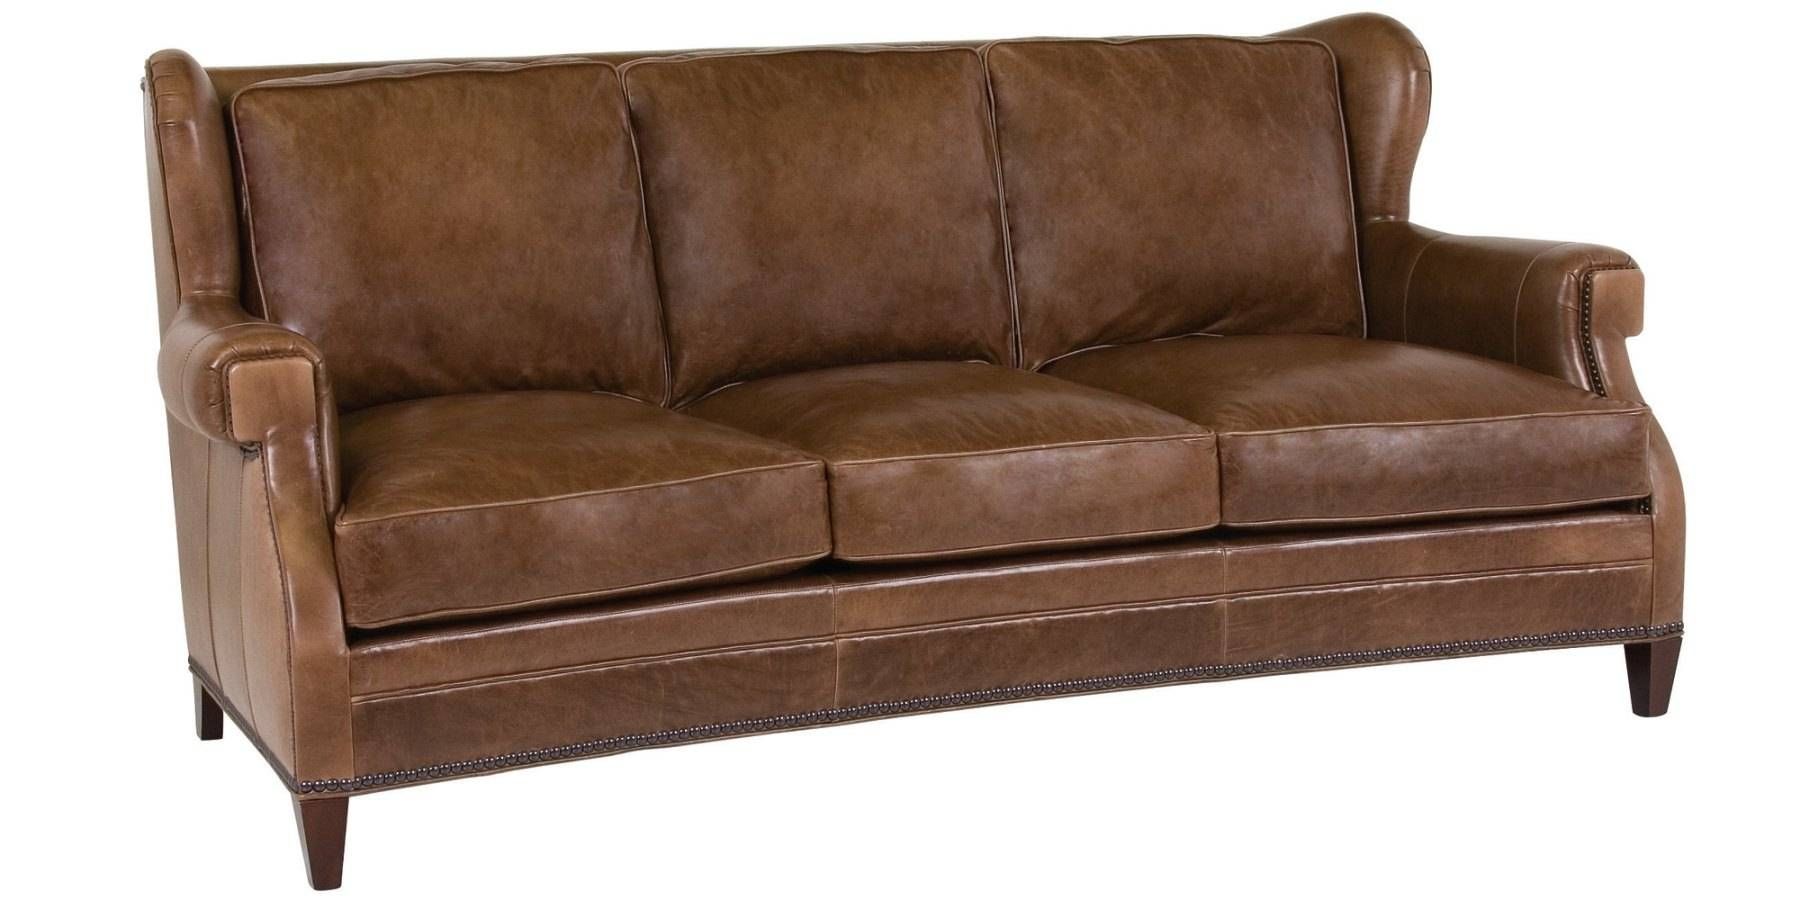 Leather Furniture | Club Furniture Intended For Brown Leather Sofas With Nailhead Trim (View 8 of 15)